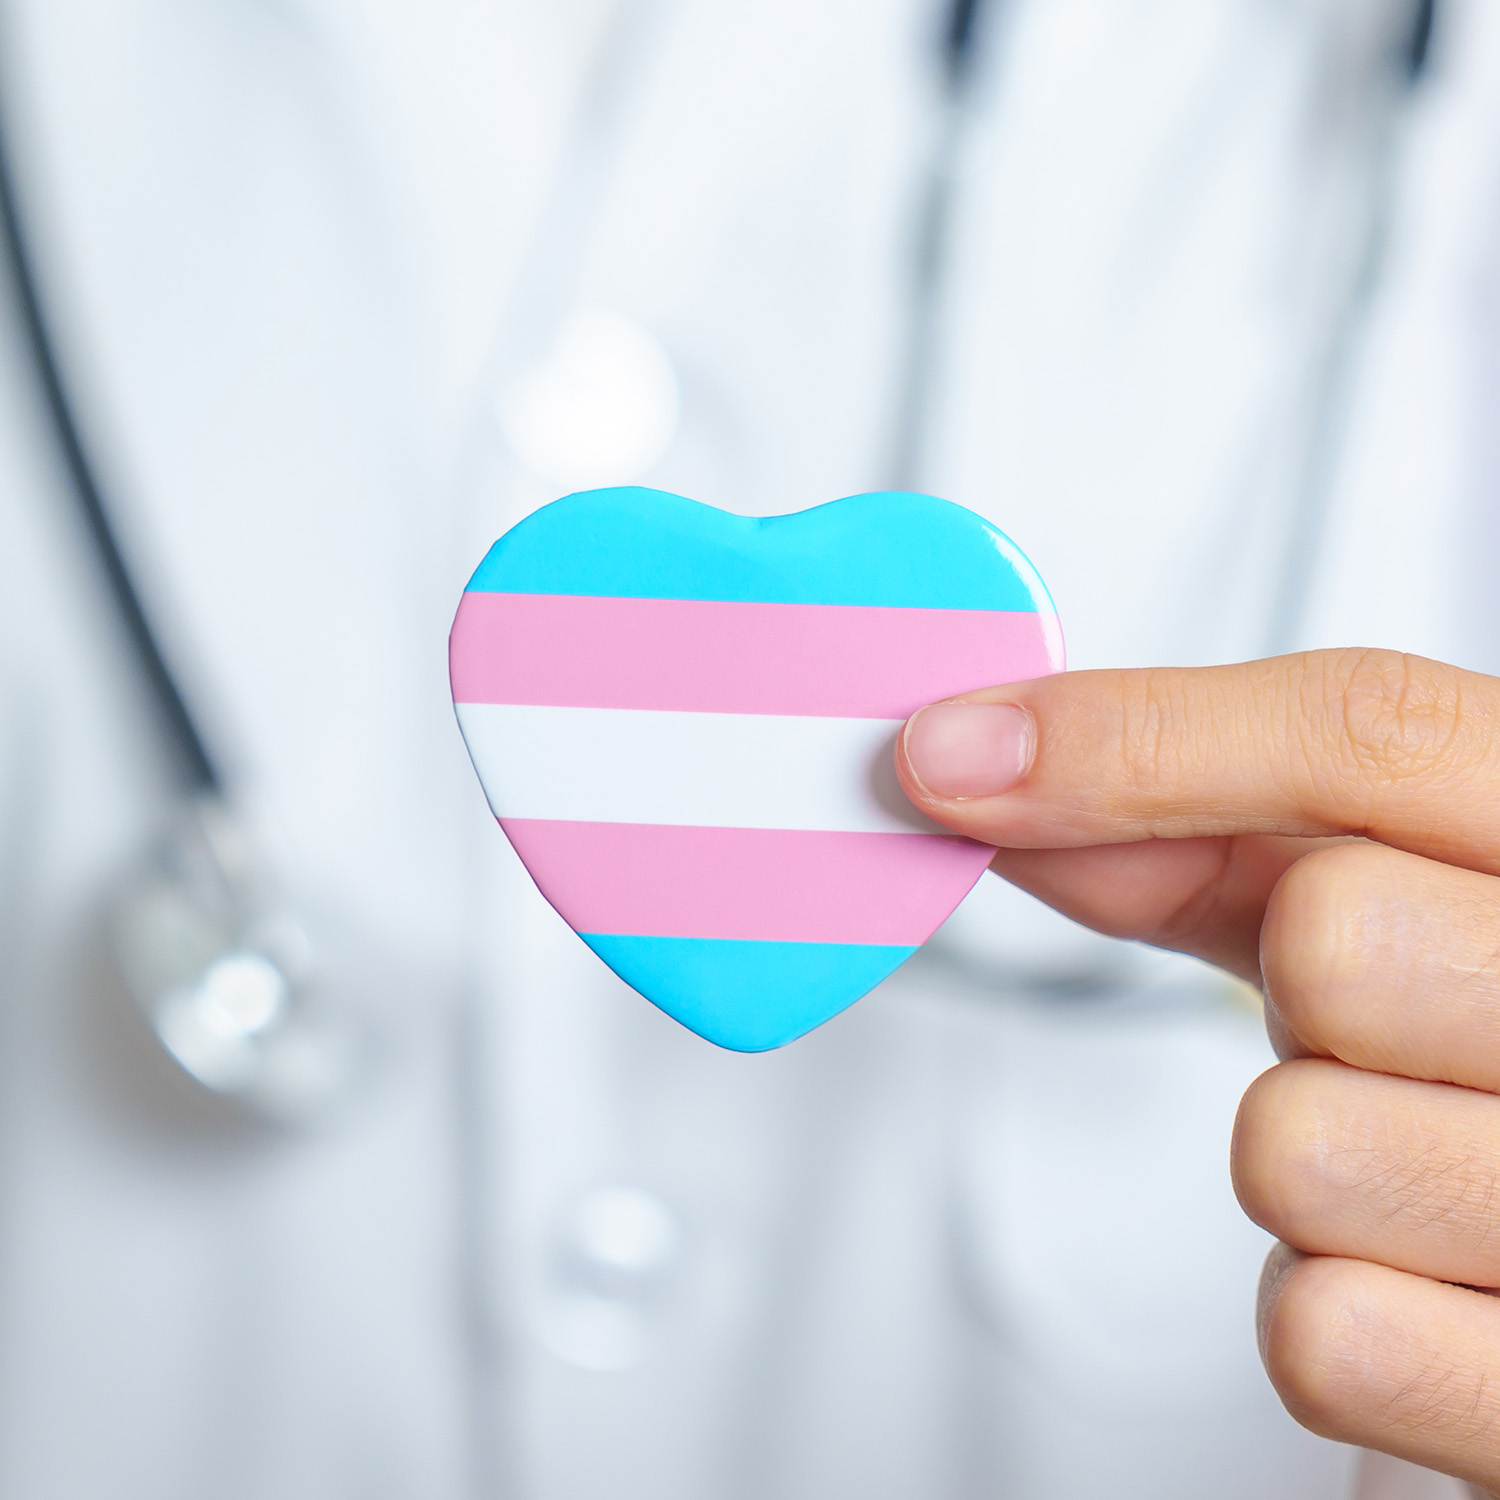 A blue, white, and pink heart being held by a person's hand with a white coat and a stethoscope in the background